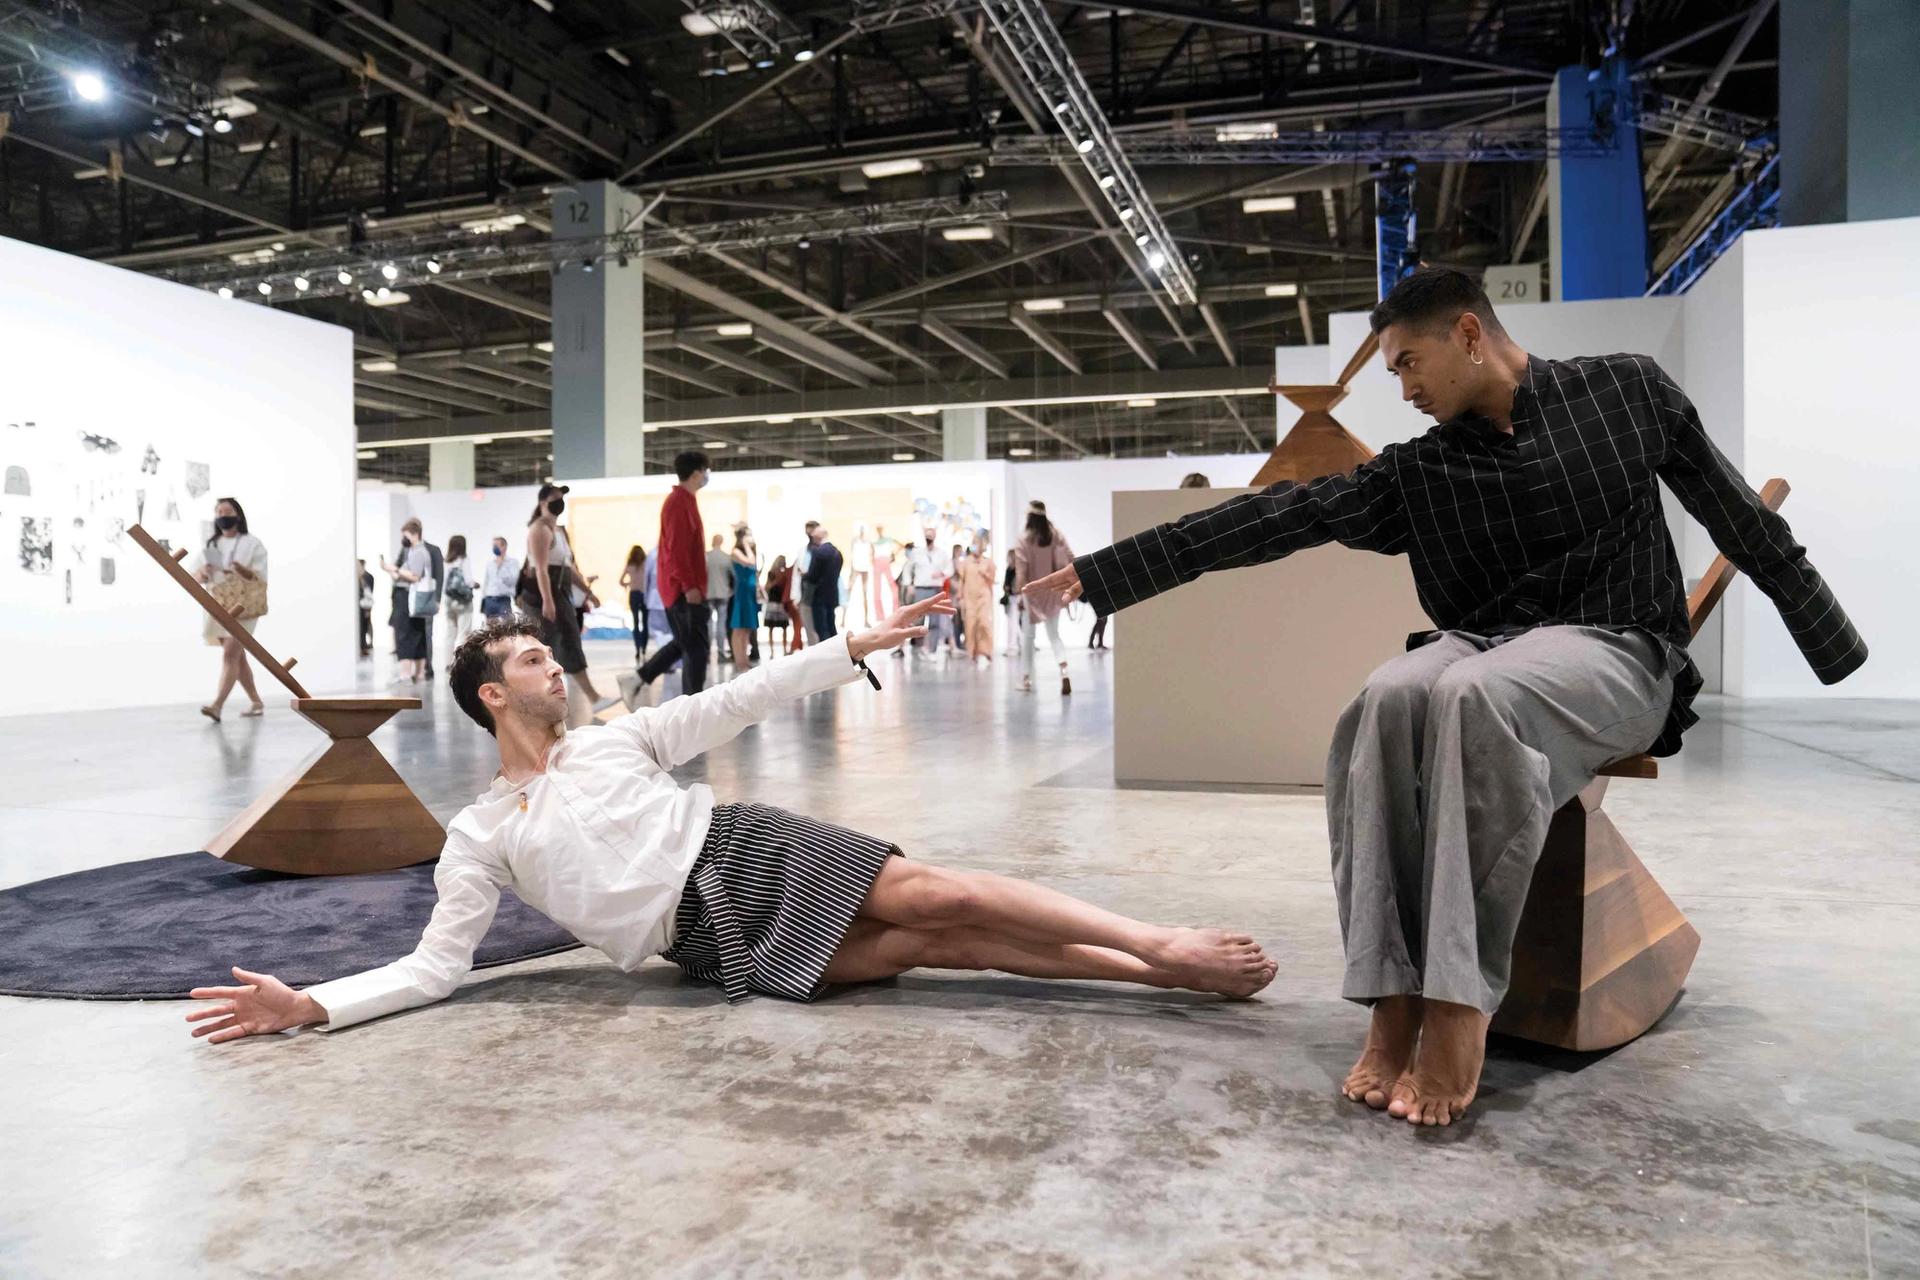 Brendan Fernandes, Contract and Release (2019-21) presented by Monique Meloche

“These were first presented at the Noguchi Museum [in New York], and they were inspired by props Isamu Noguchi designed for [the US dancer and choreographer] Martha Graham’s 1944 dance piece, Appalachian Spring. Noguchi’s sculptures were very stable and static, but these have movement and for Fernandes they’re about how the body is colonised—even through dance.”